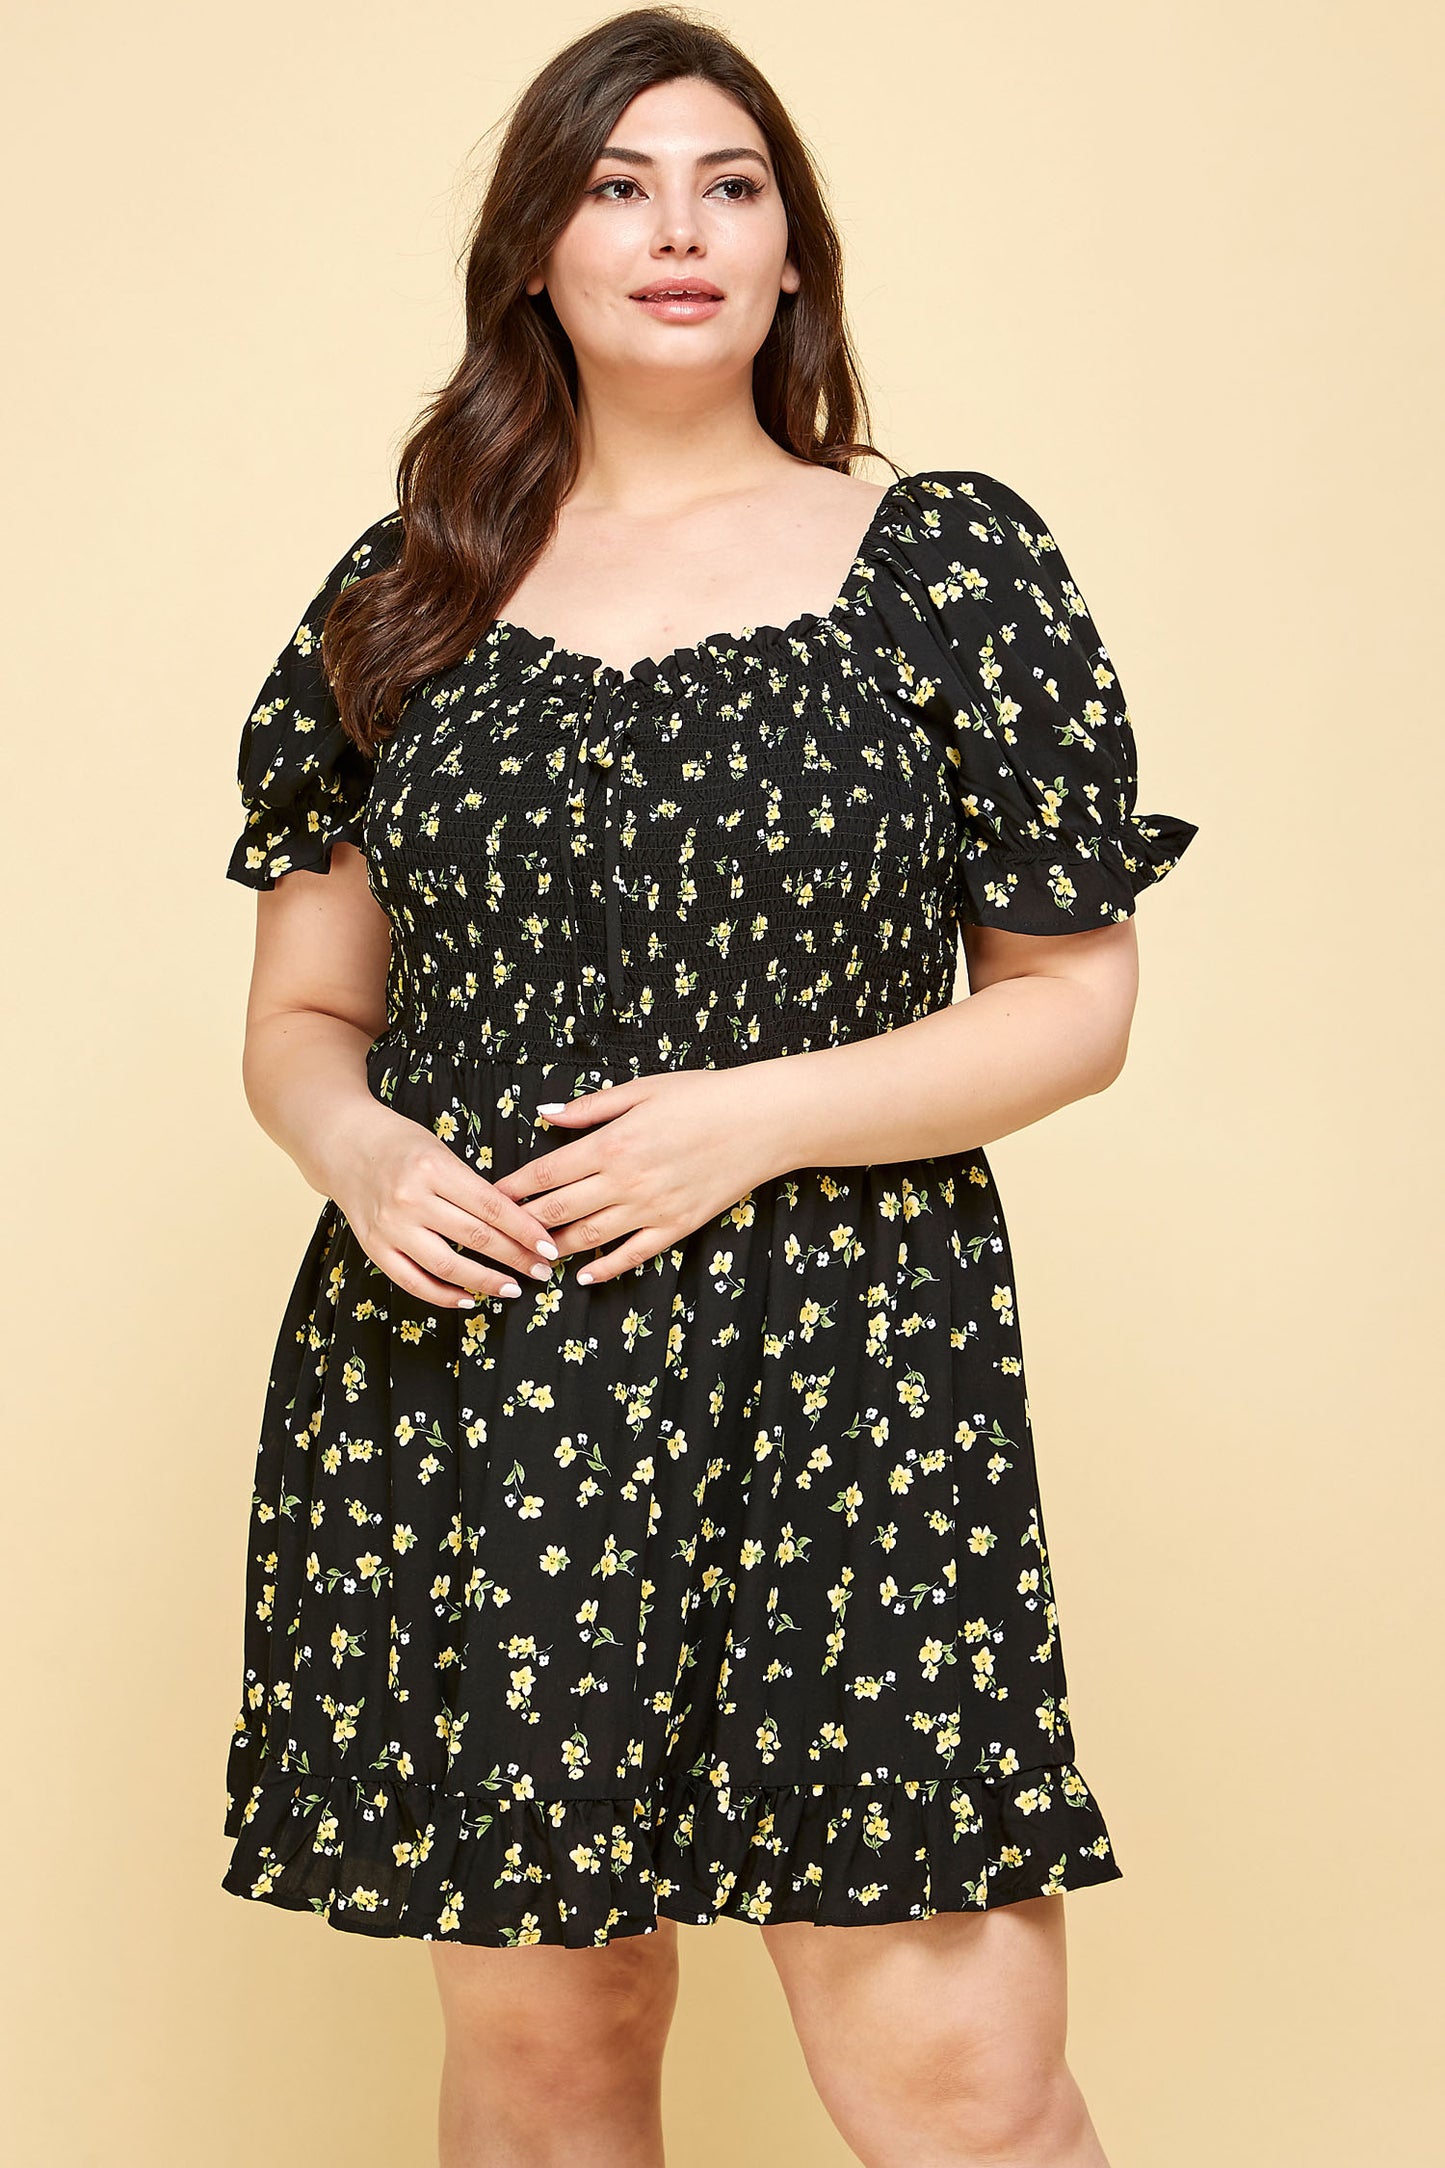 PLUS SIZE FLORAL BABYDOLL DRESS IN BLACK WITH YELLOW FLOWERS